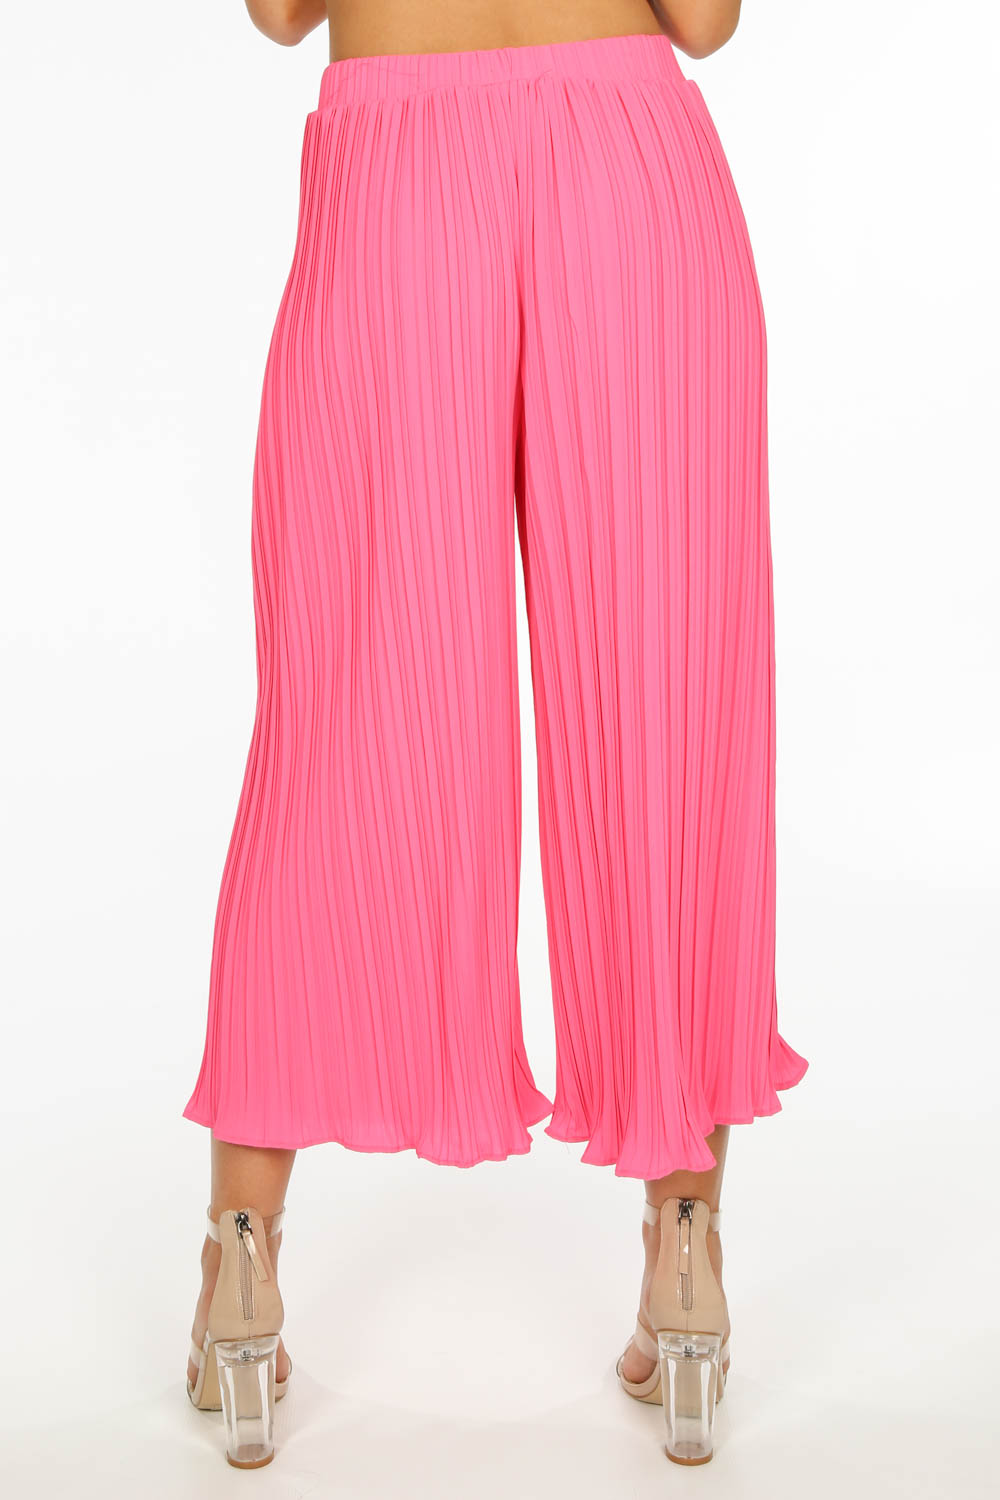 Fuchsia Crinkle Pleat Palazzo Trousers and Cami